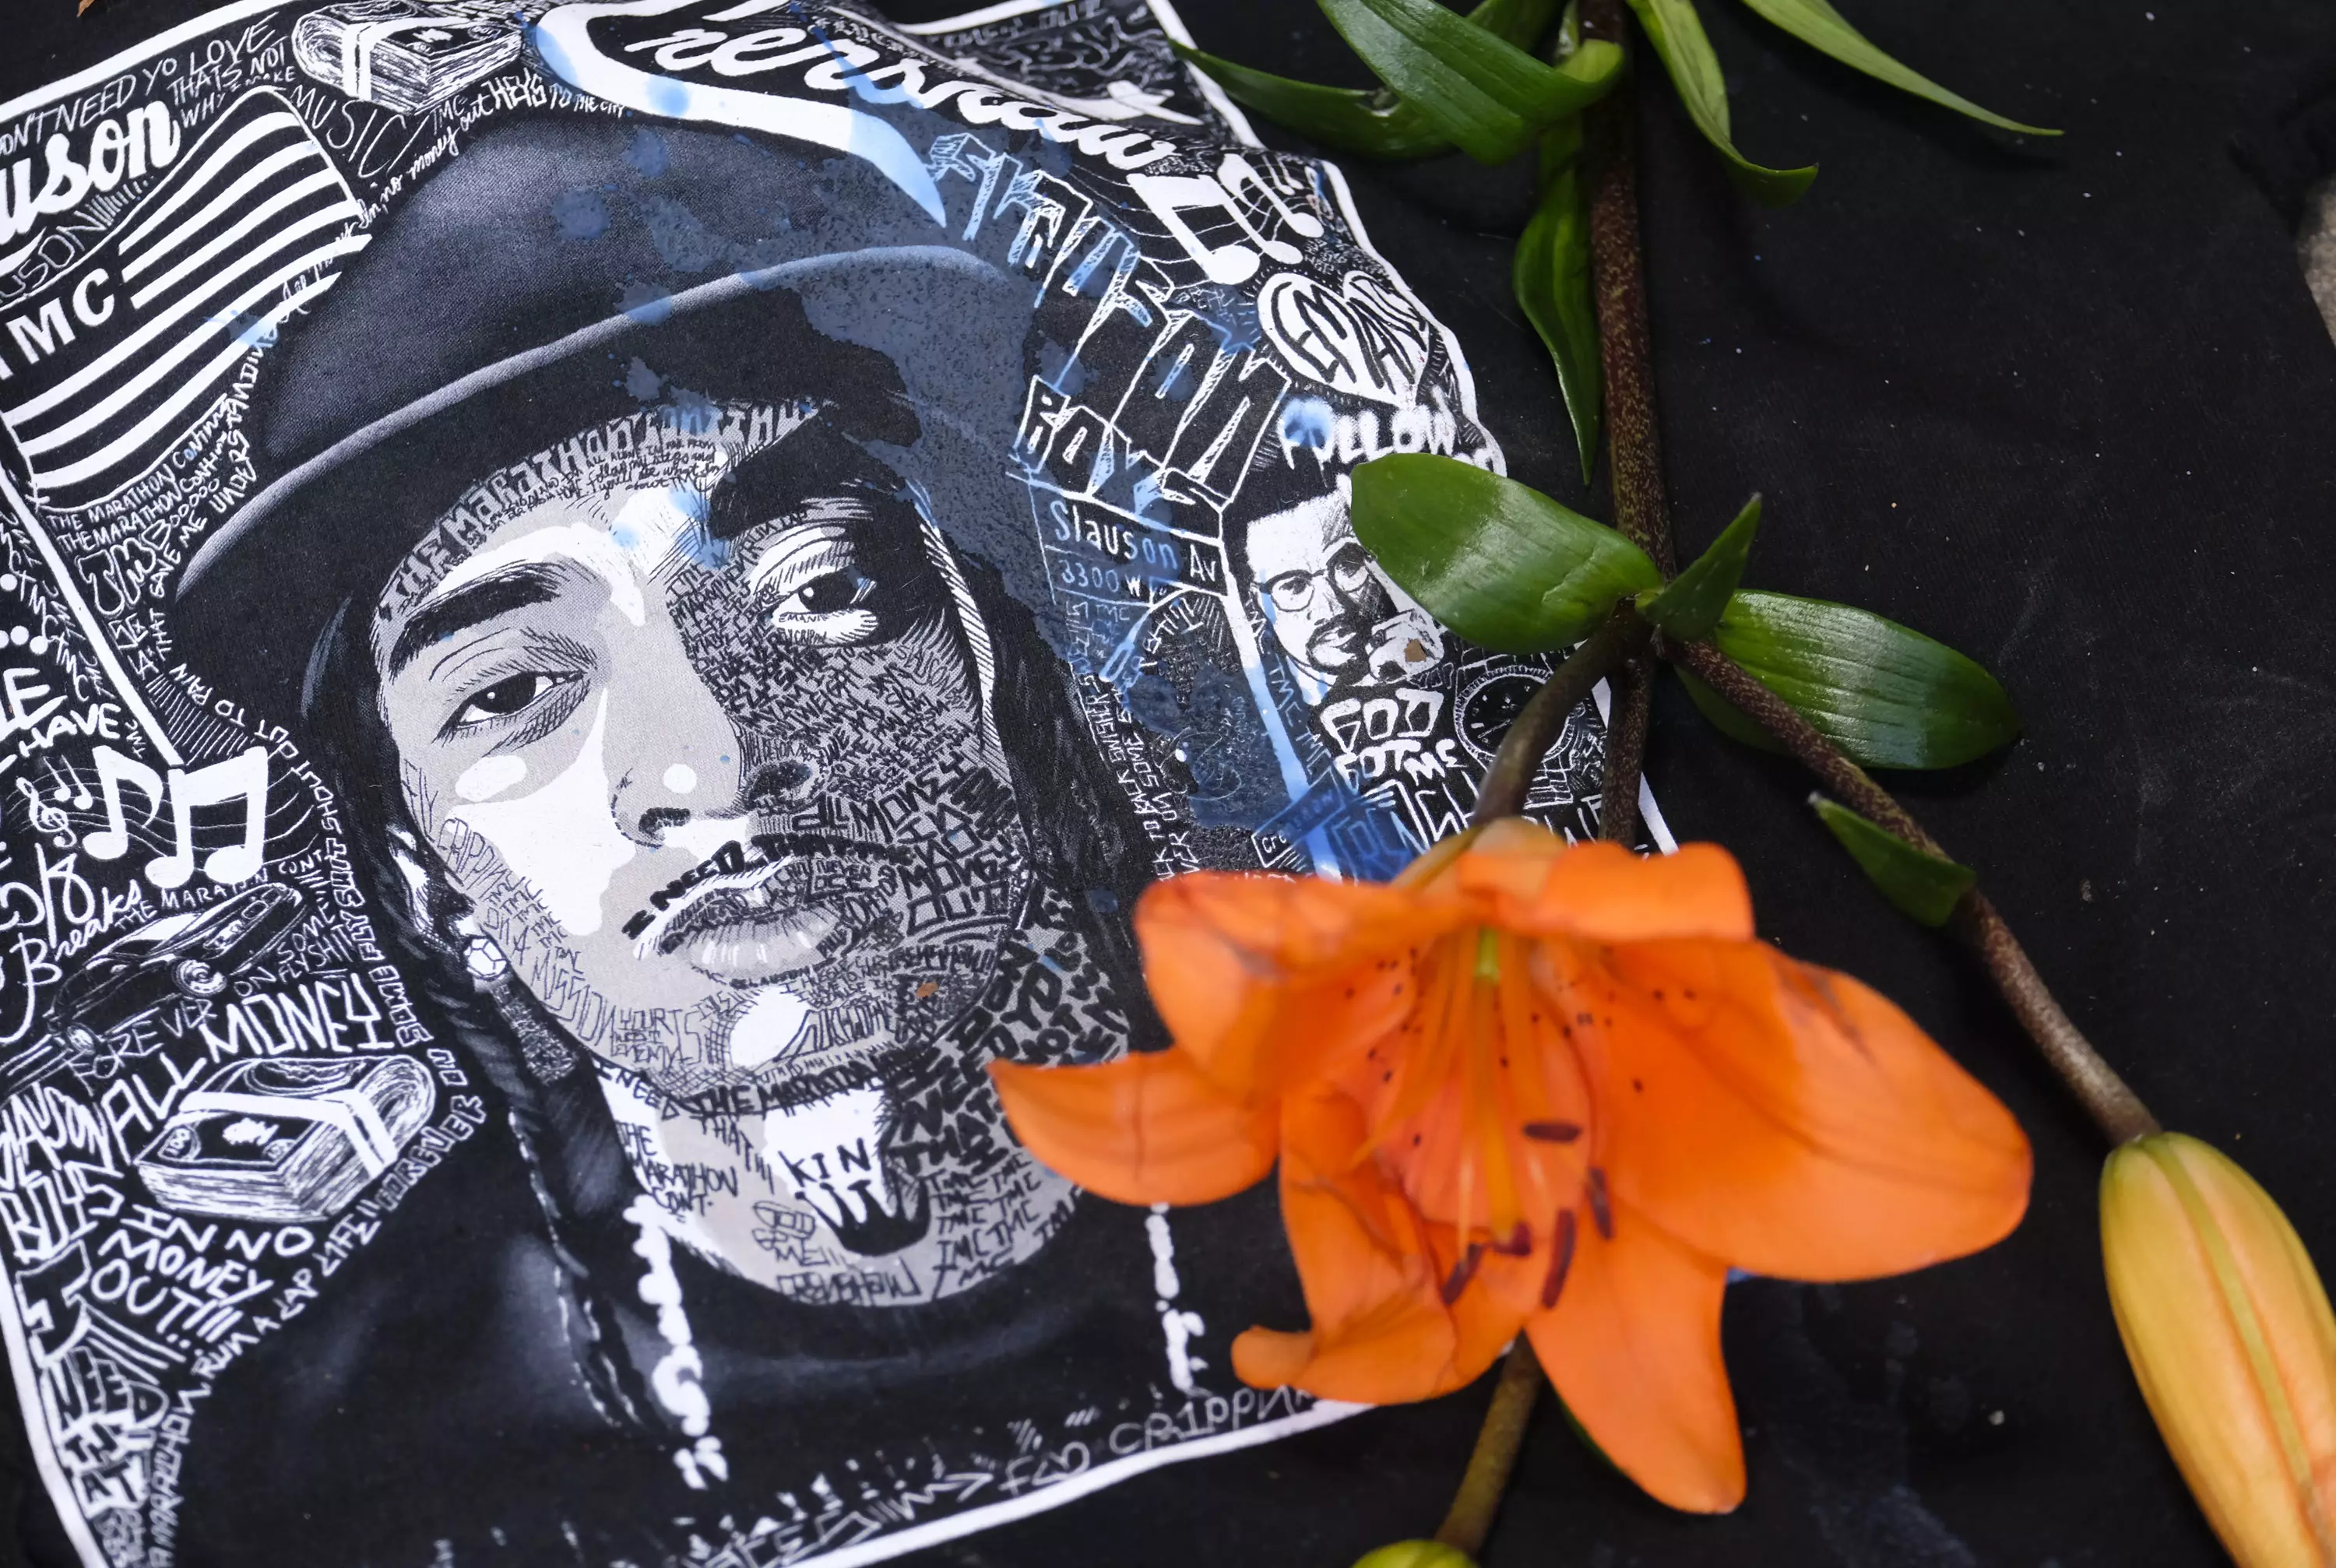 A tribute left for Nipsey Hussle (